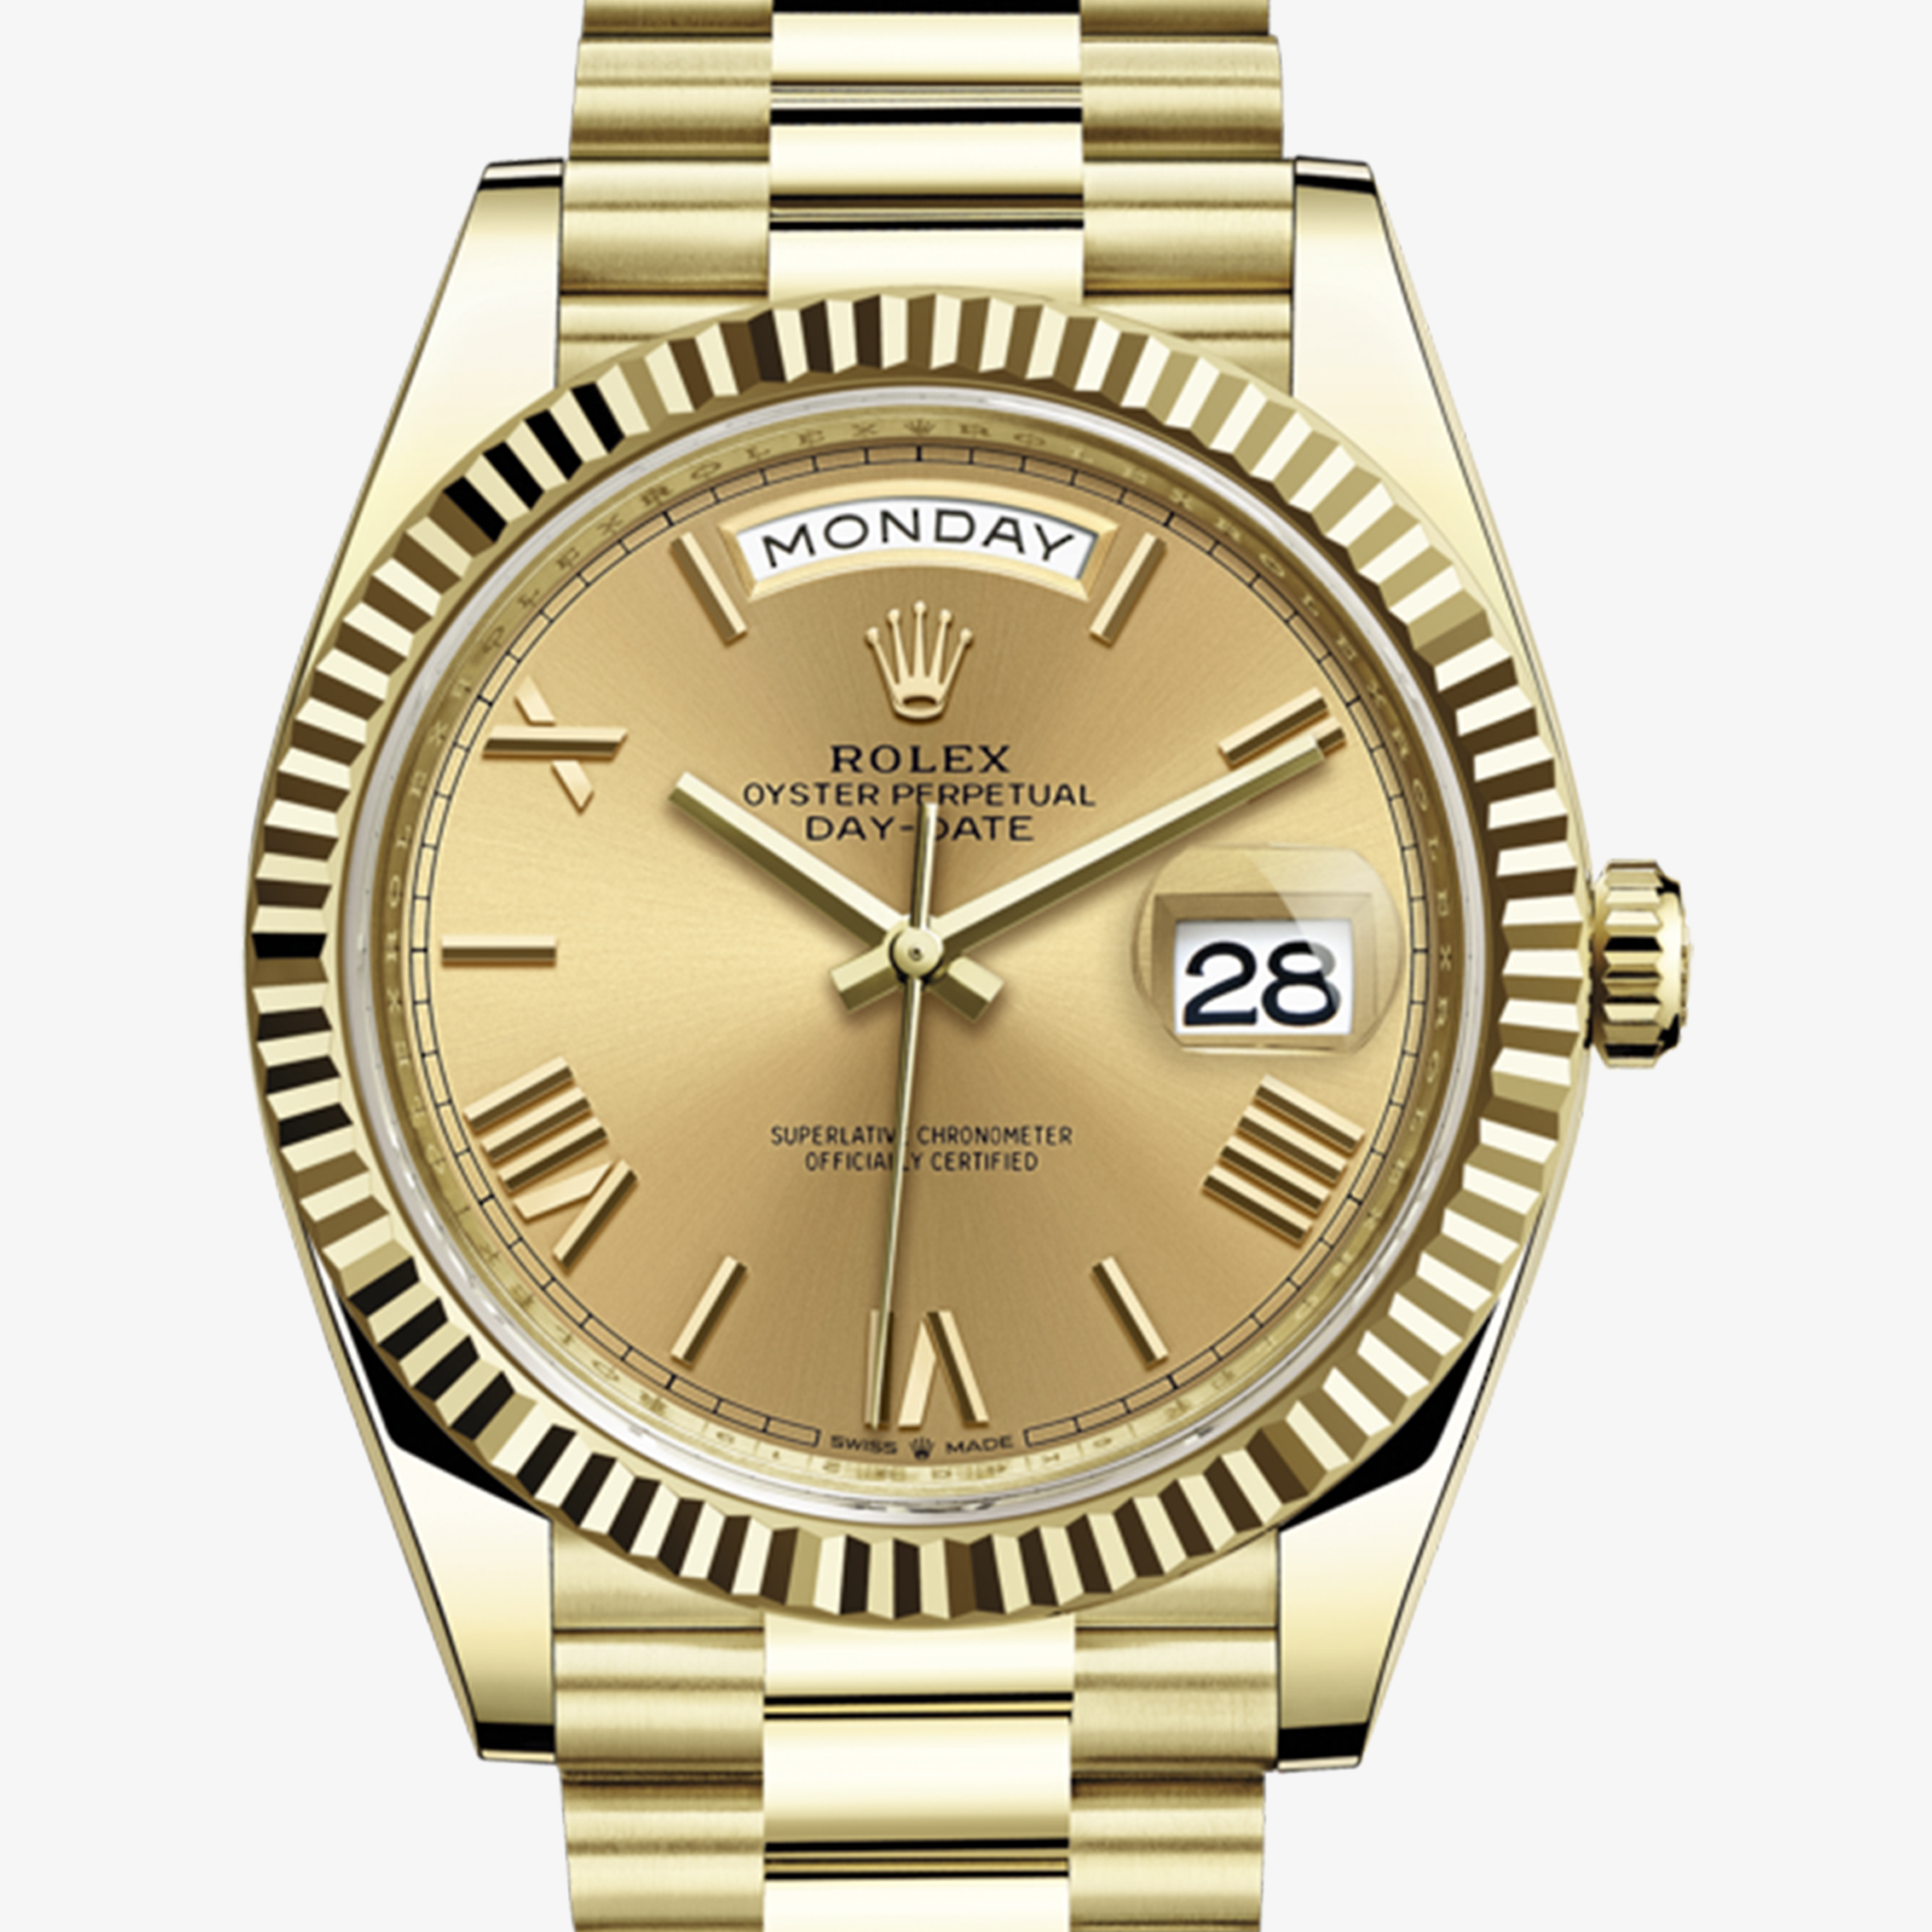 Rolex DayDate Oyster, 40 mm, yellow gold M2282380006 Day Date